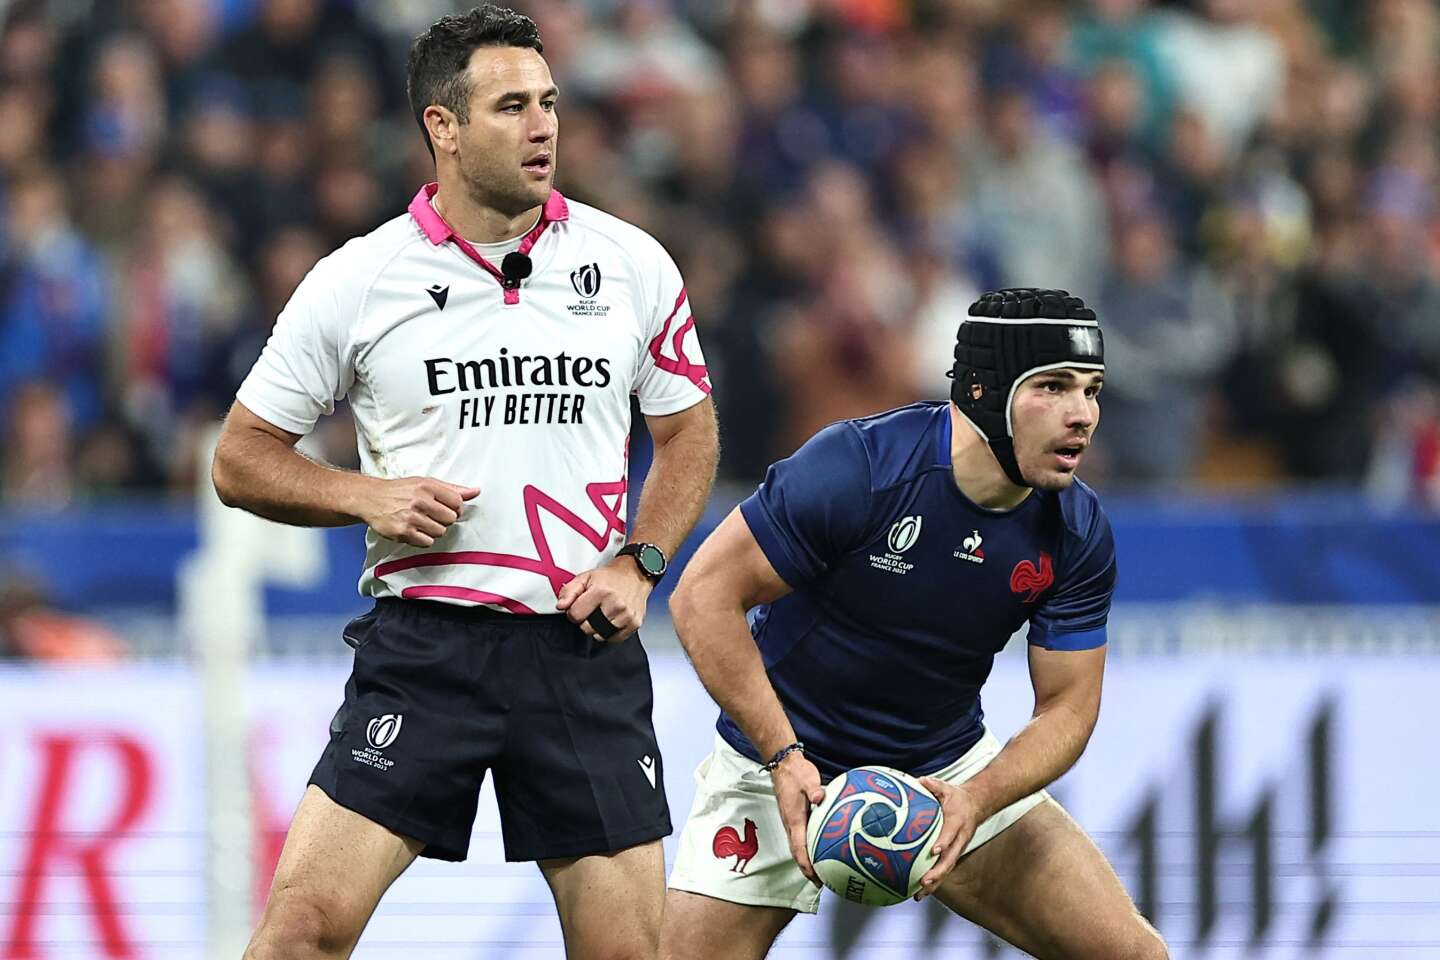 France and South Africa won their first games on the first week of